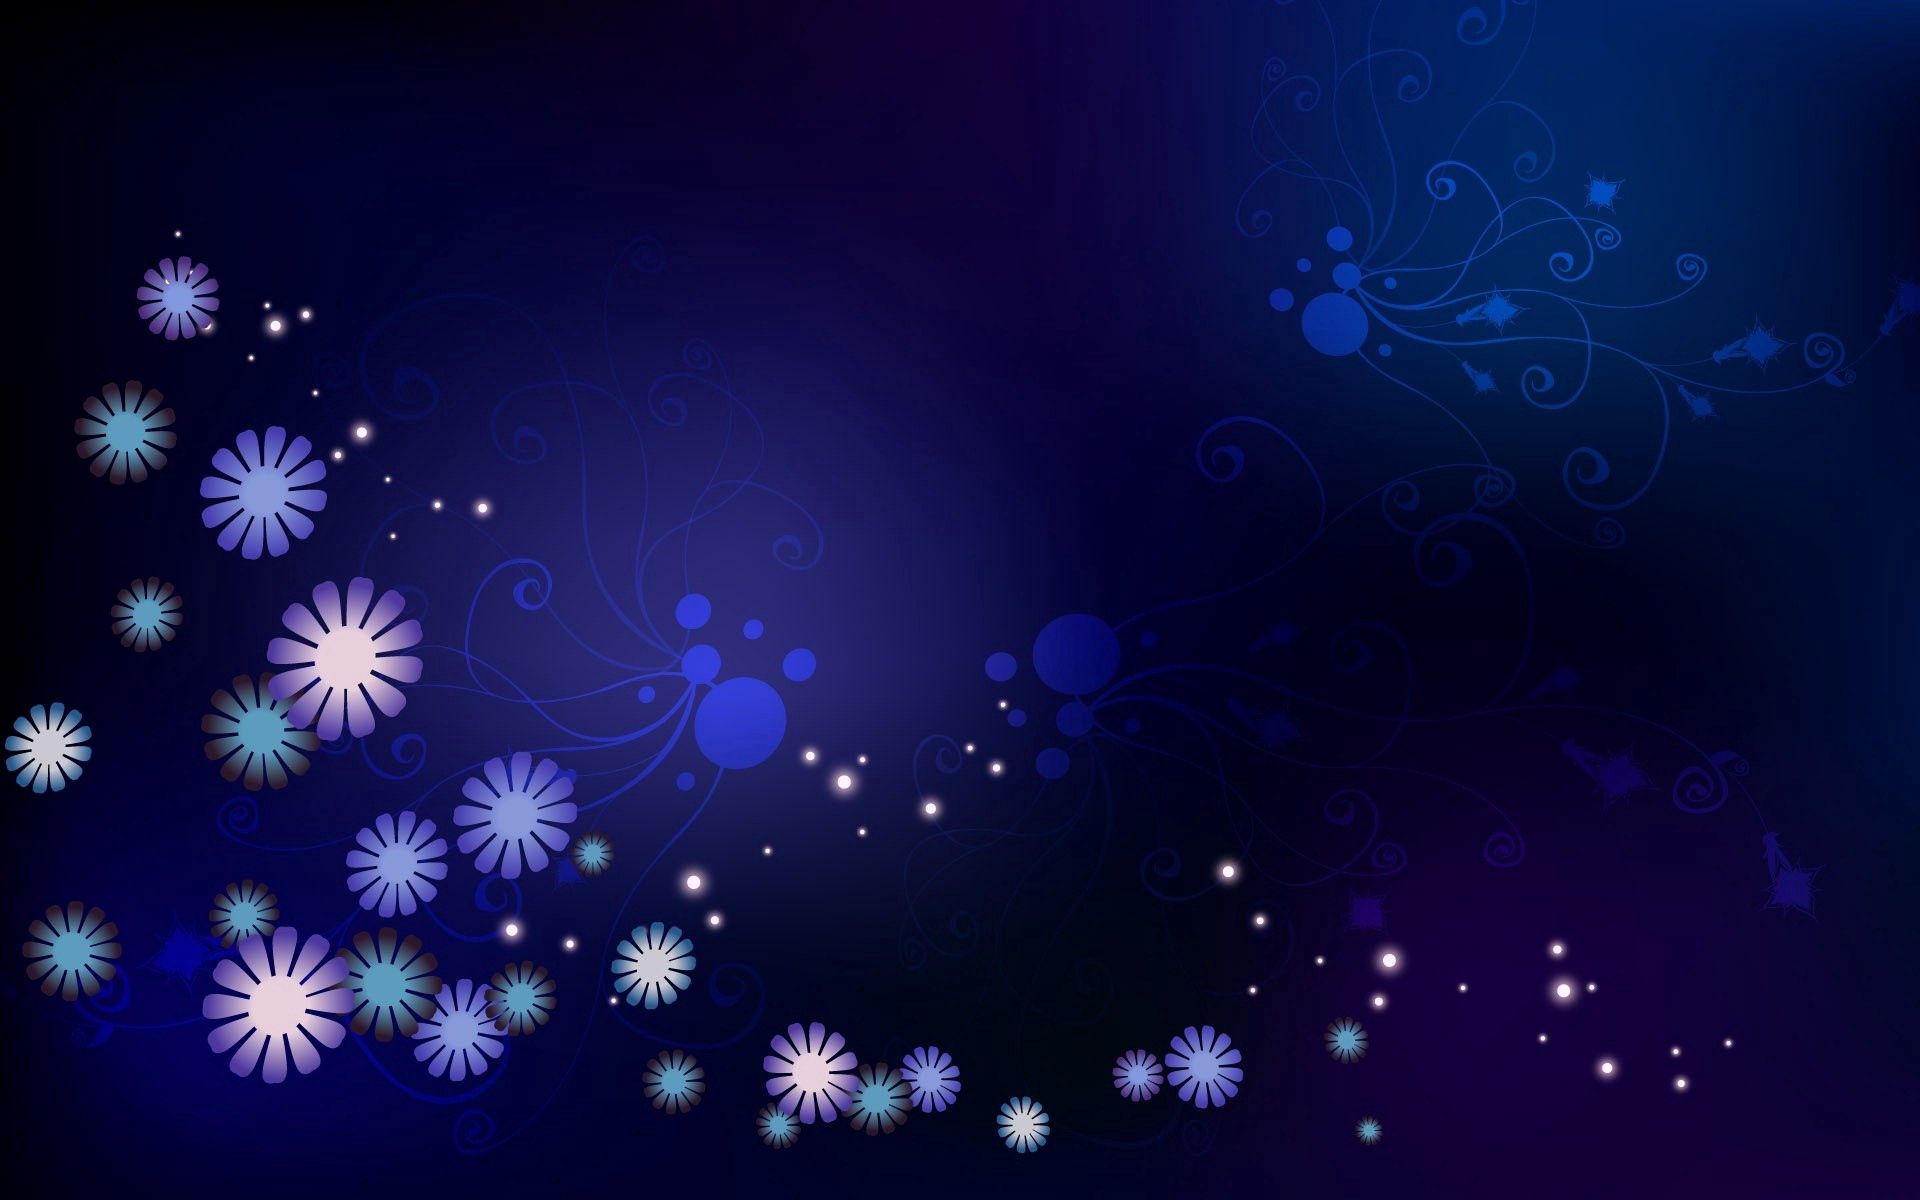 point, color, flowers, points, abstract, background, stars, circles, shine, light 2160p